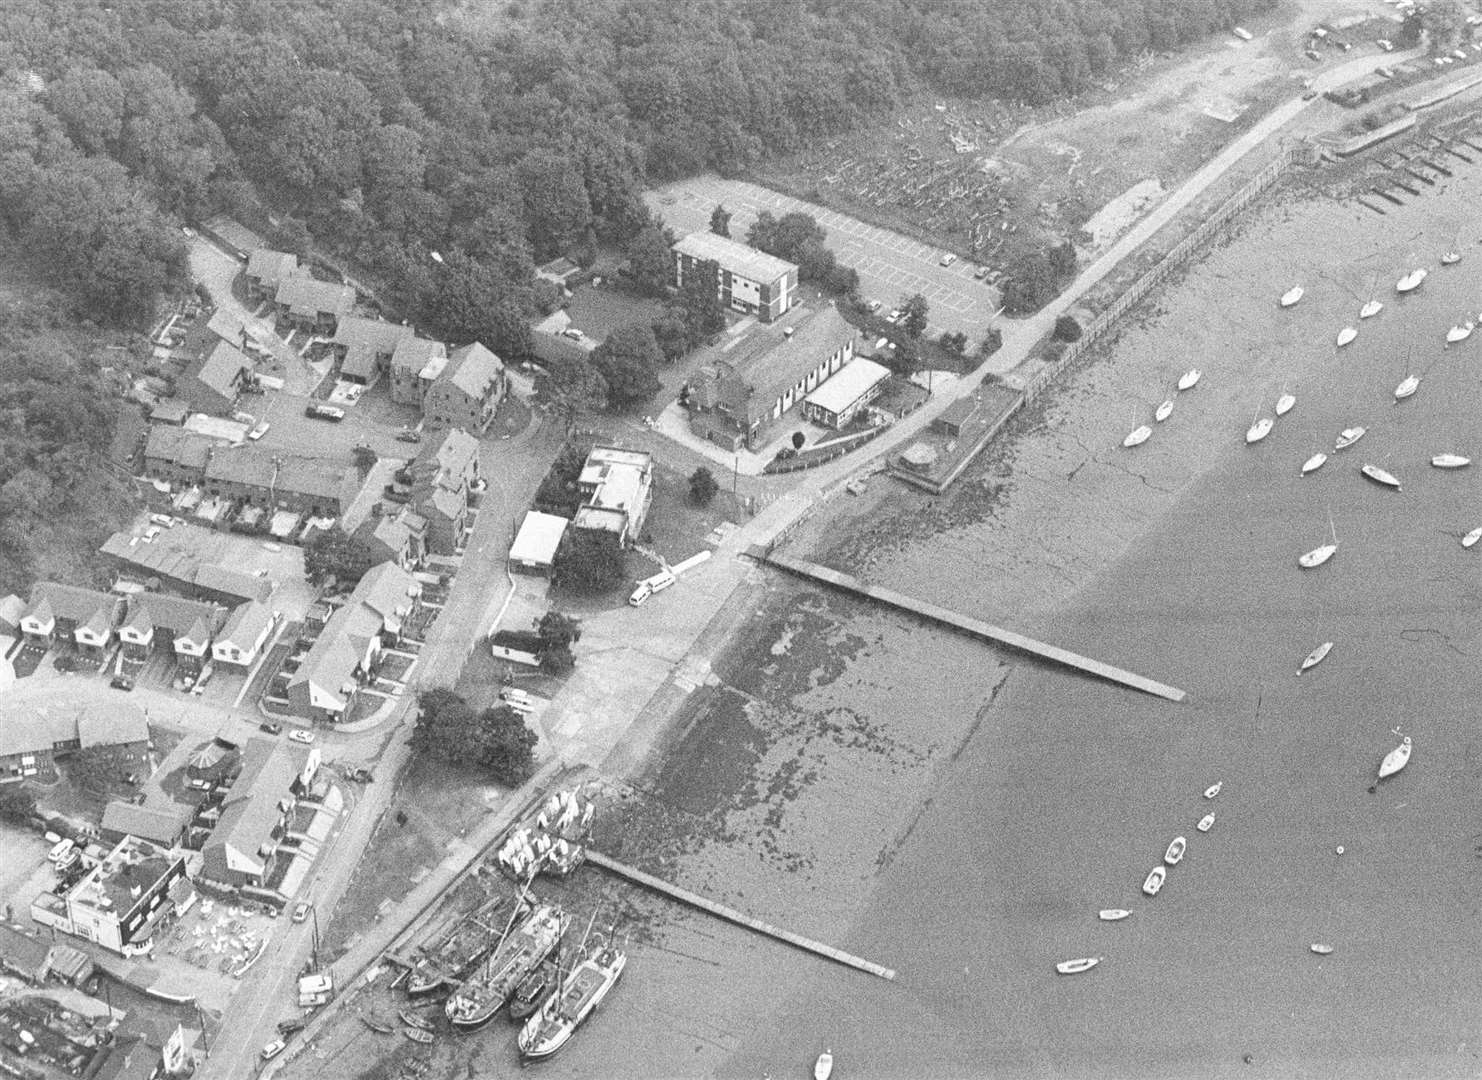 An aerial view of Upnor taken in July 1986 shows part of the riverside and the former Arethusa Centre